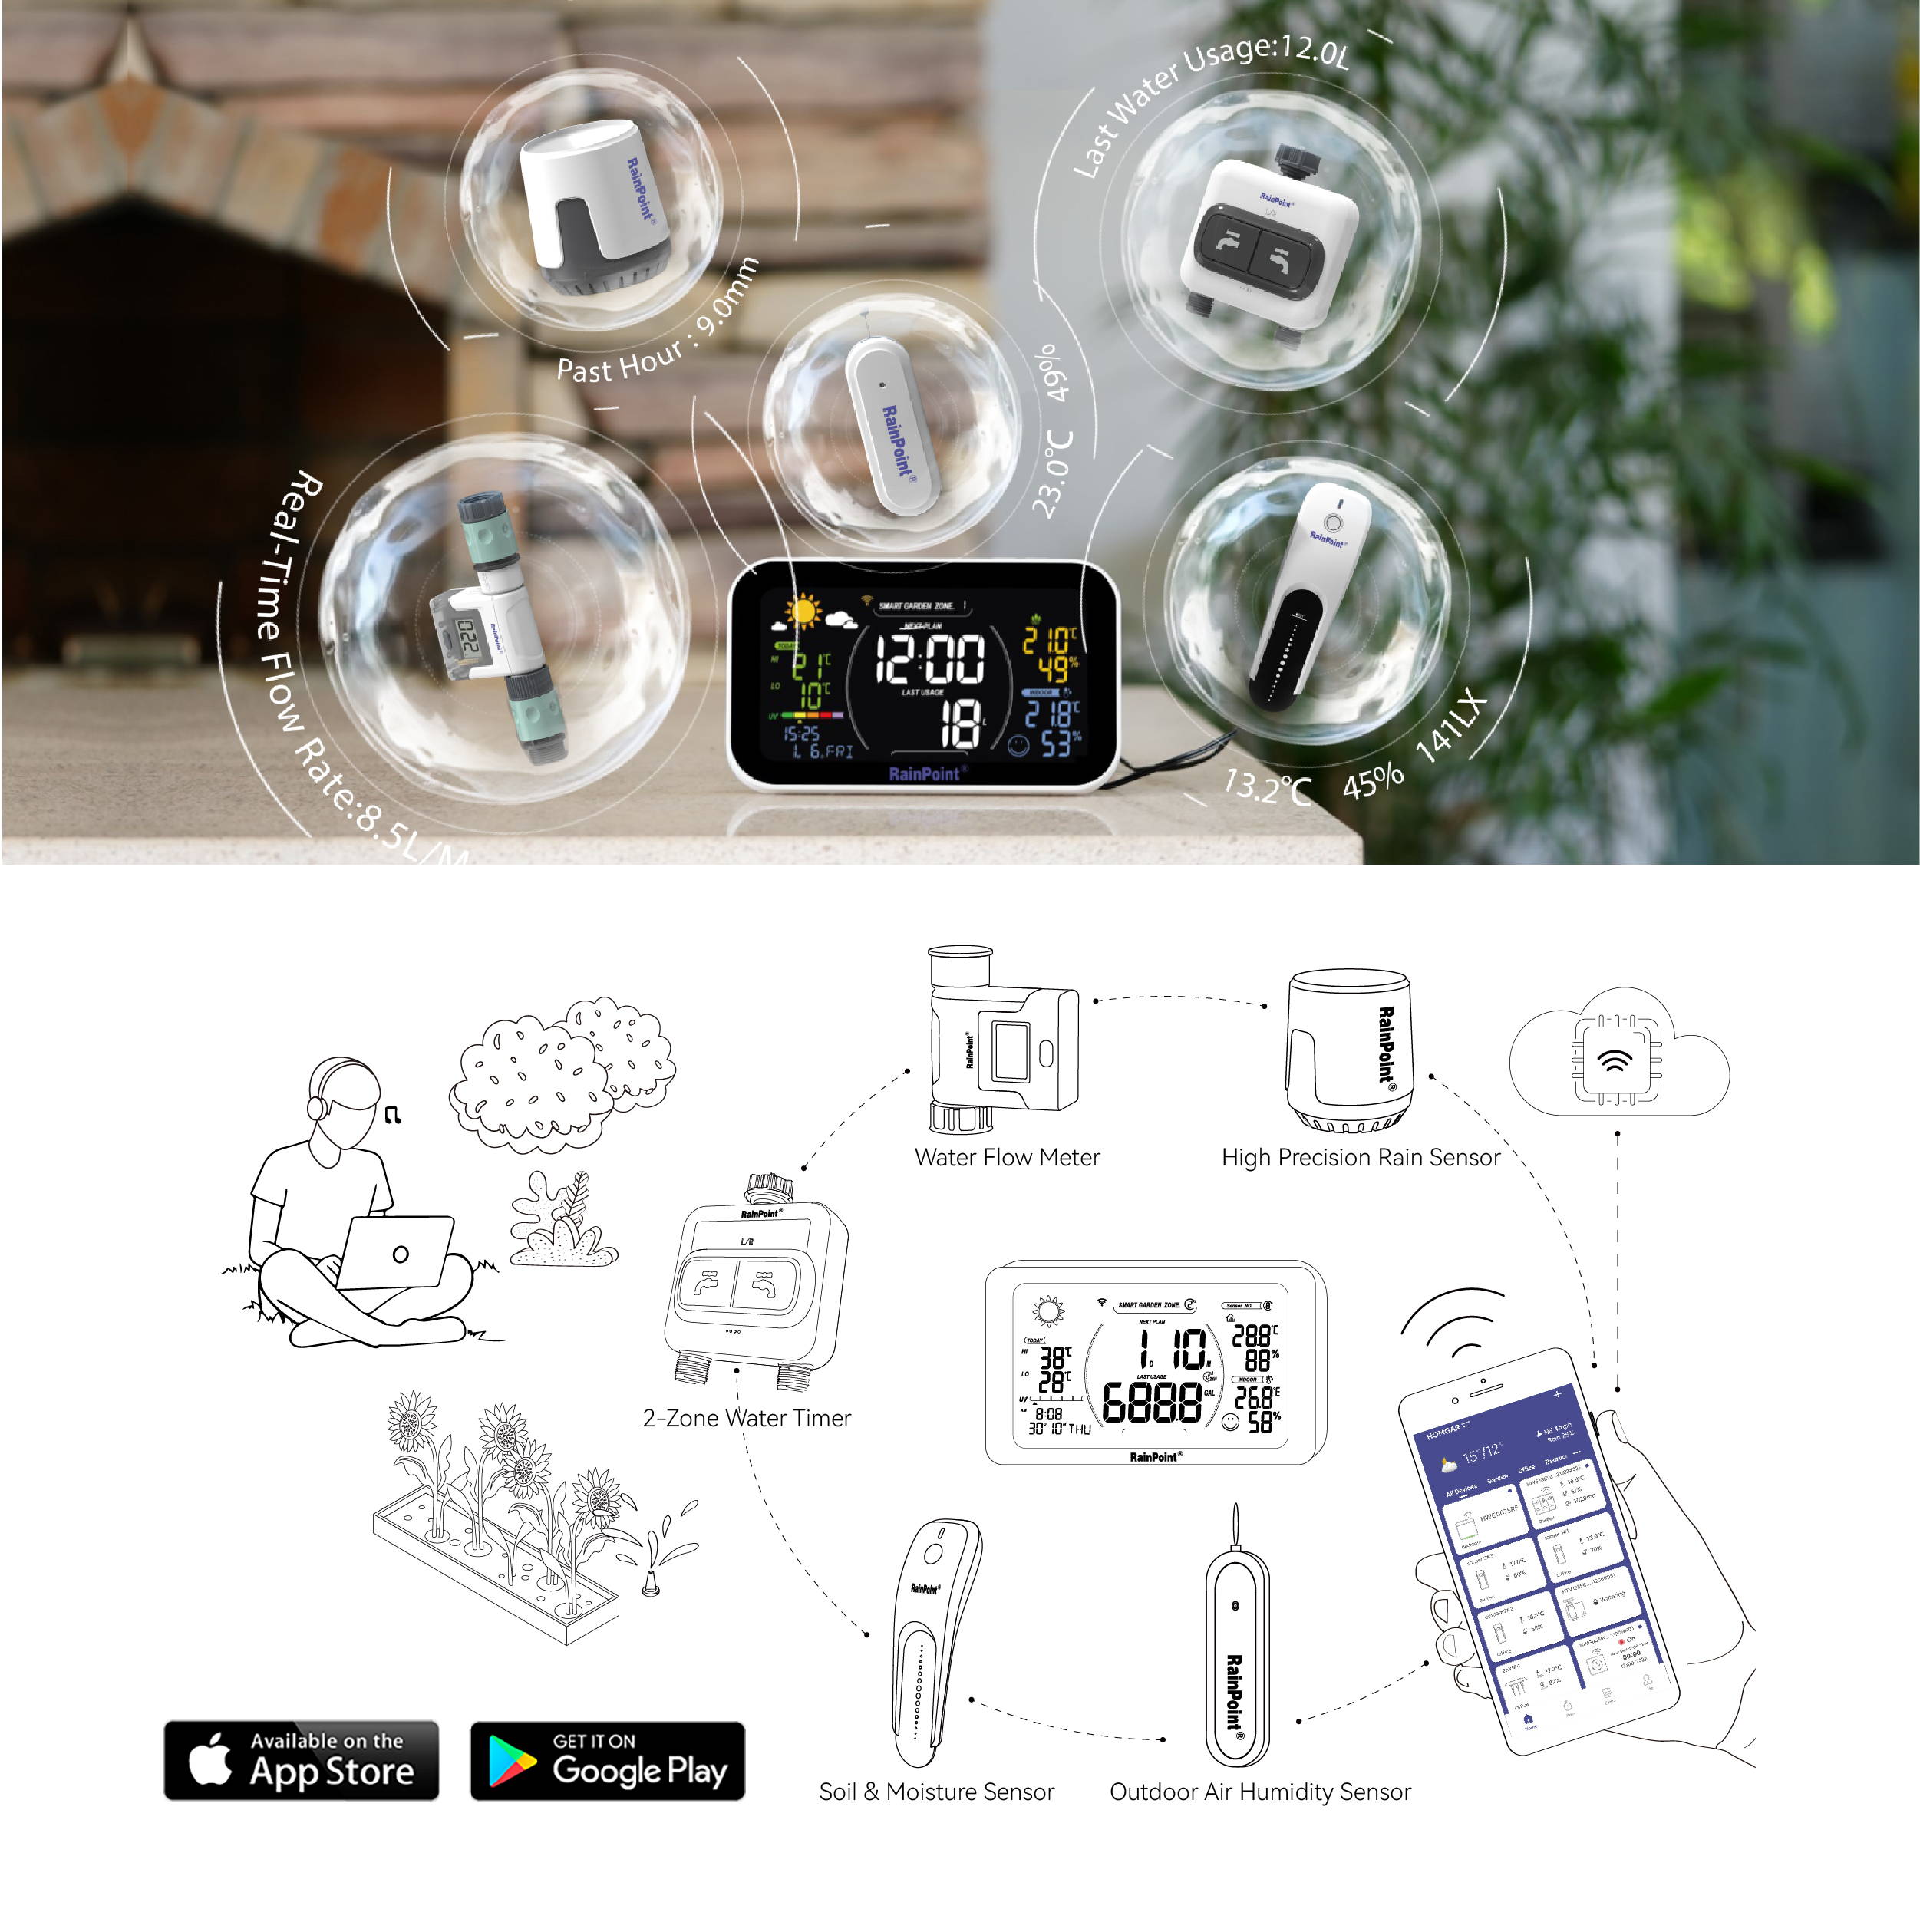 RainPoint is an intelligent irrigation system that integrates a Water Timer, Soil & Sunlight Sensor, Rain Gauge. and Outdoor Thermometer for self-analysis and requlation. With RainPoint Smart+, you can experience the wonder of a future garden today.